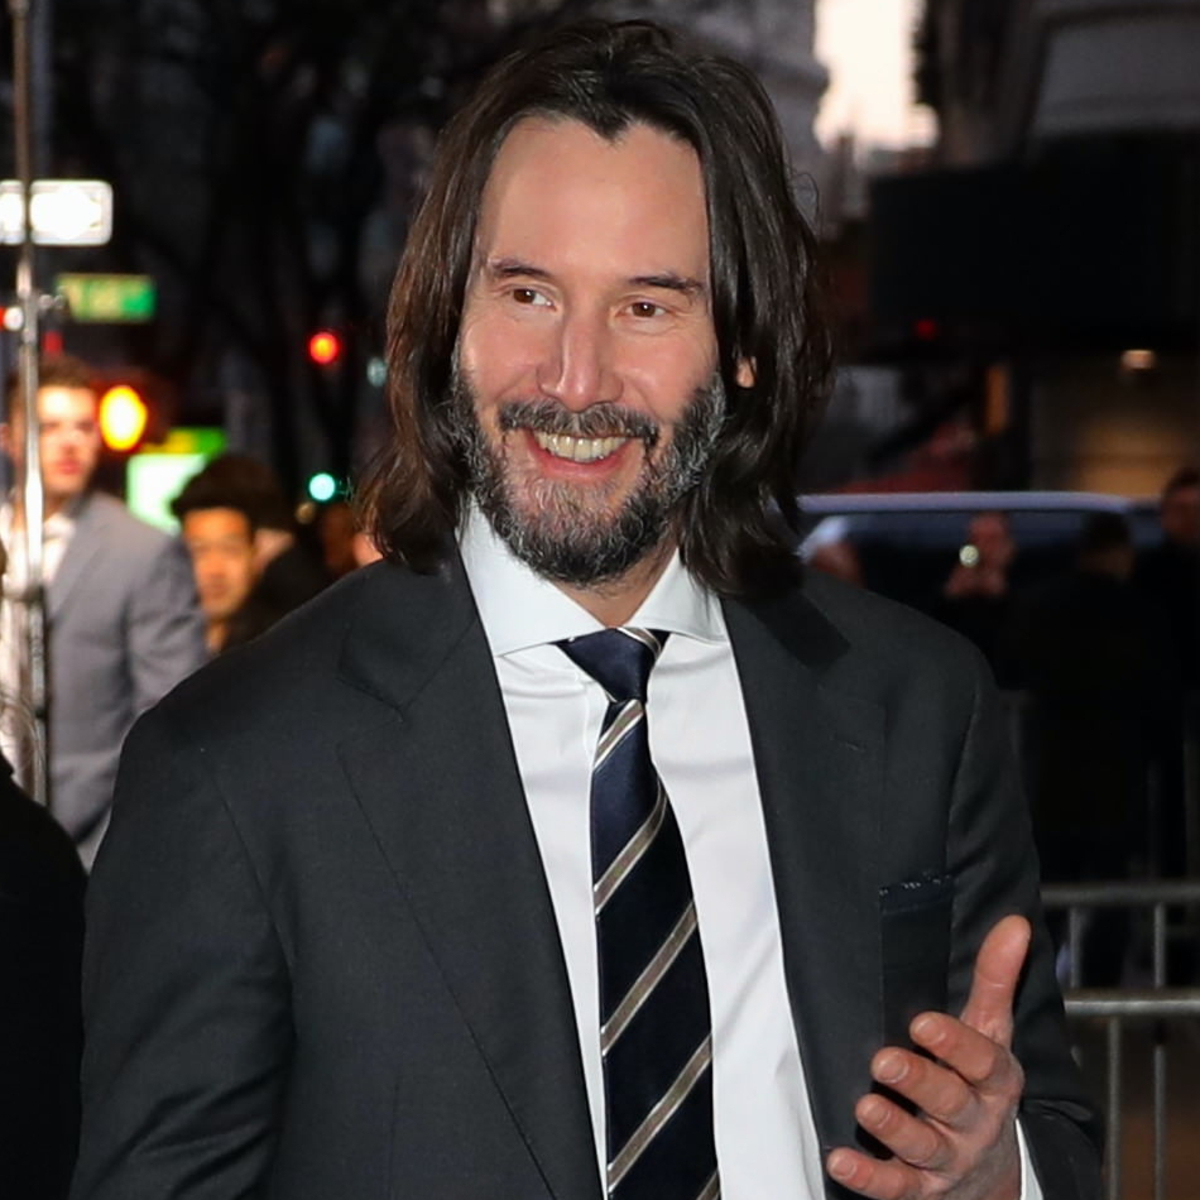 Keanu Reeves Wanted Death For John Wick But Settled For Close